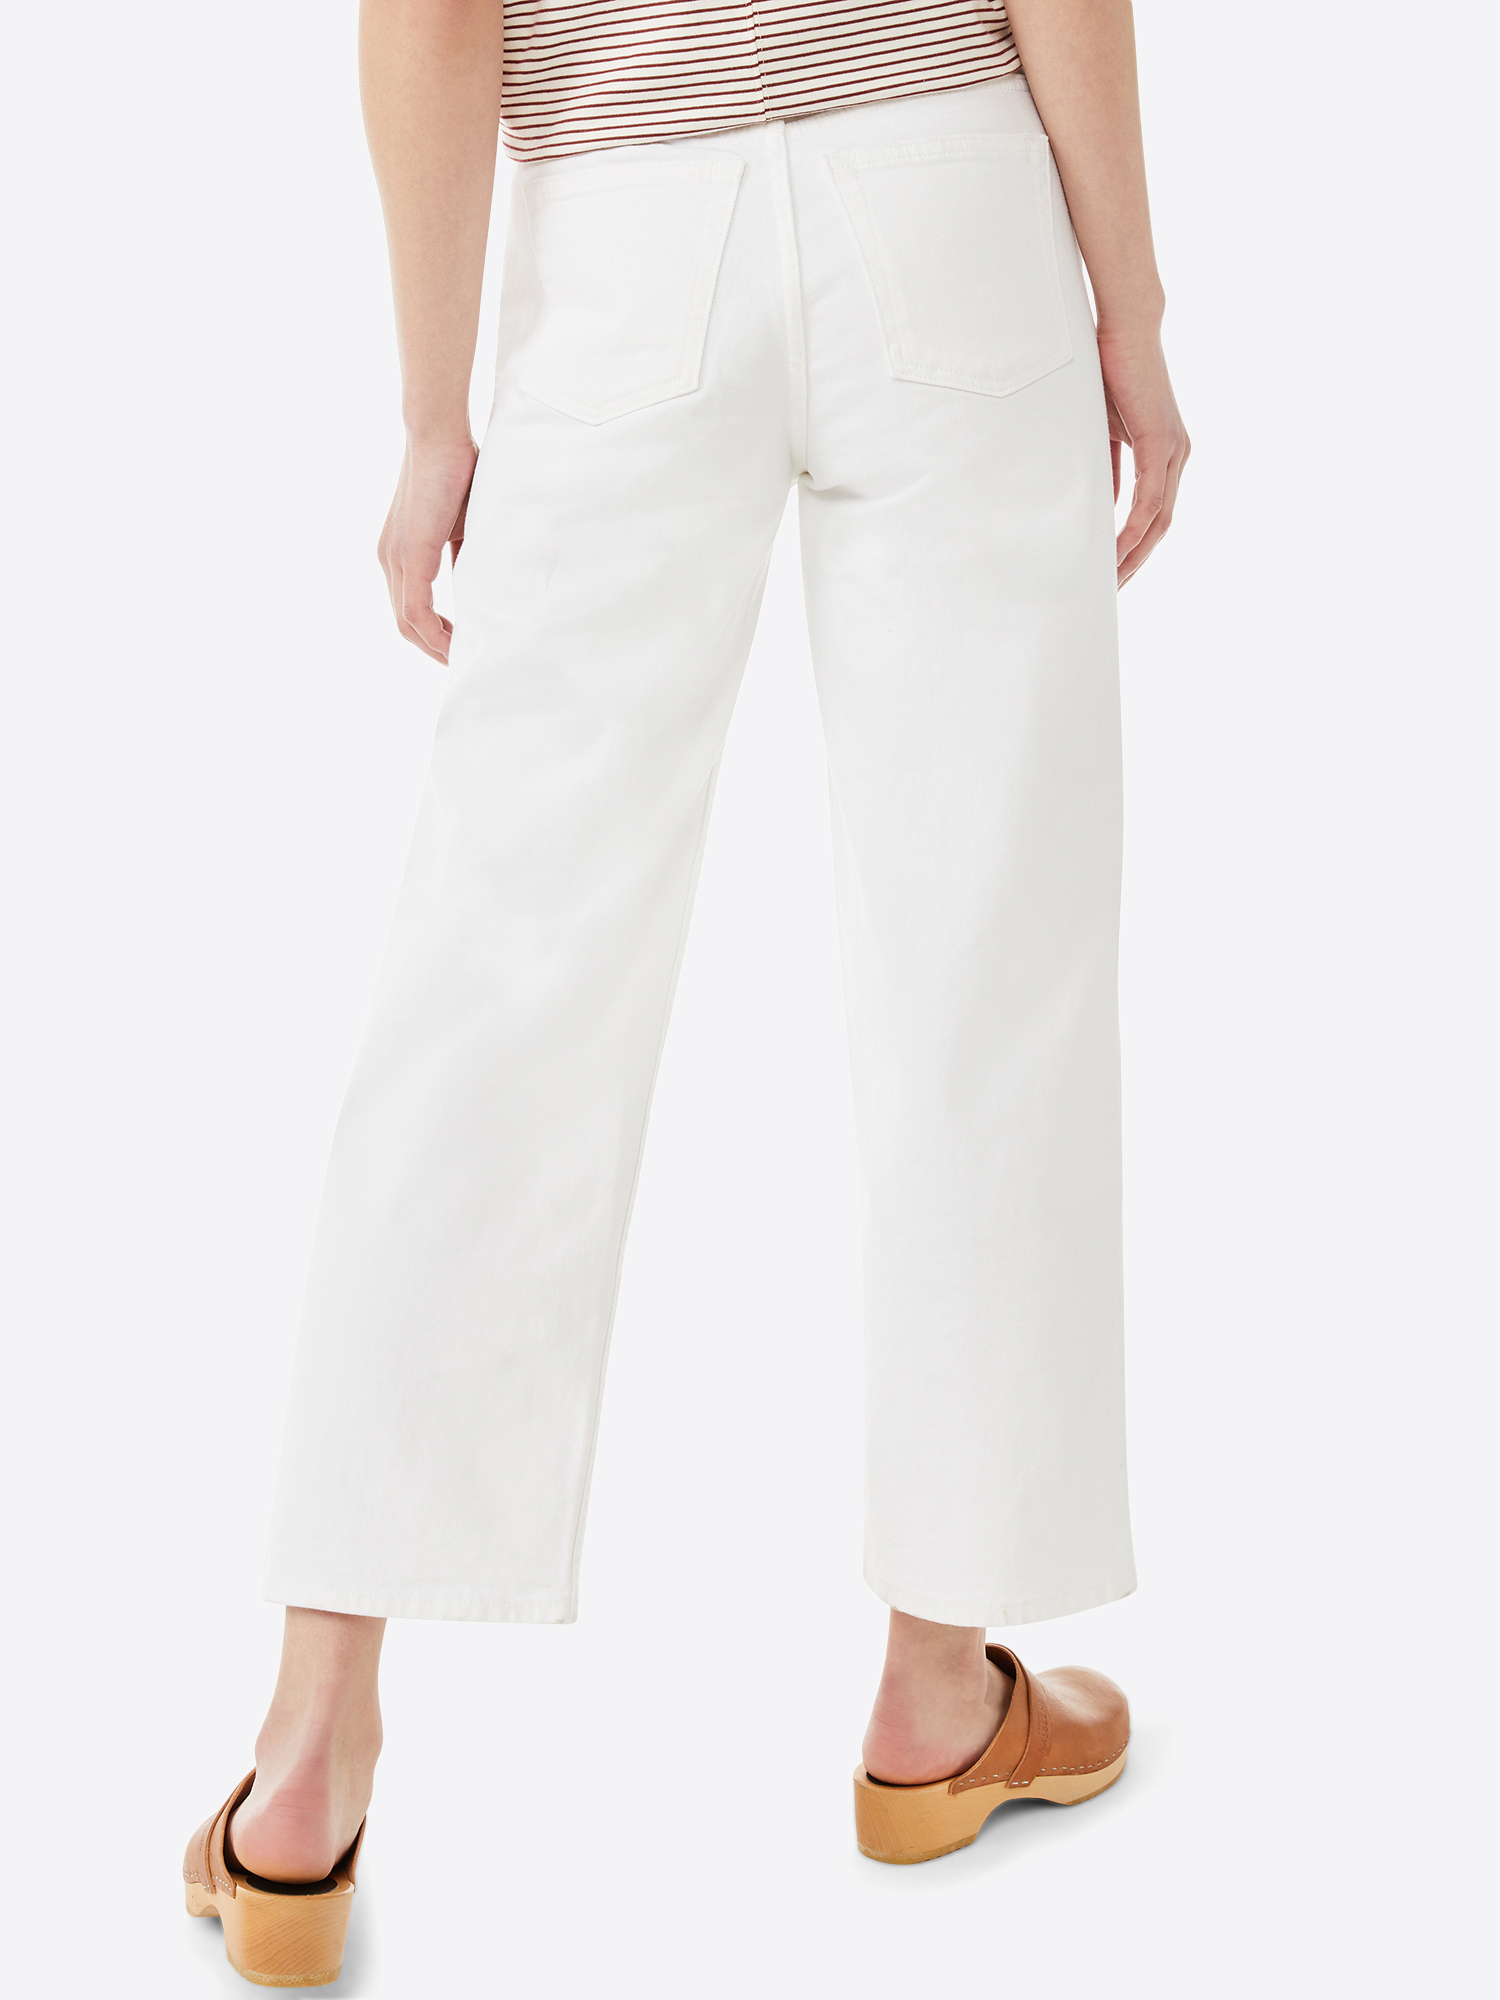 Free Assembly Women's Cropped Wide Straight Jeans - image 5 of 7